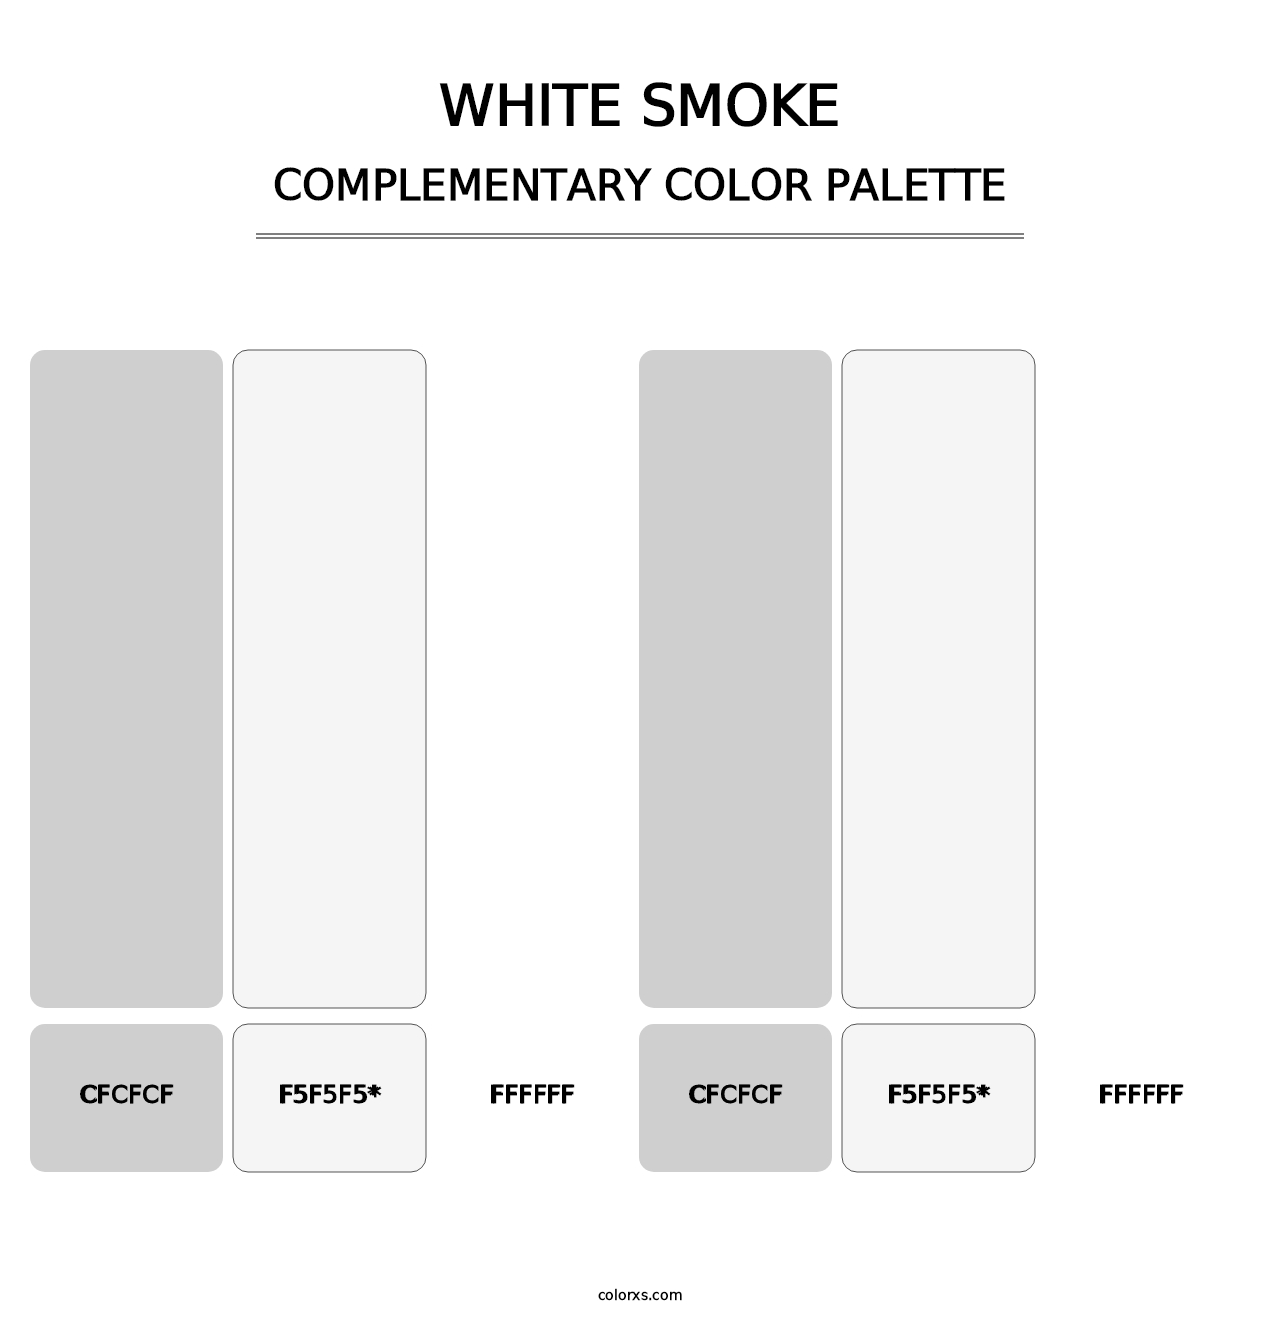 White Smoke - Complementary Color Palette